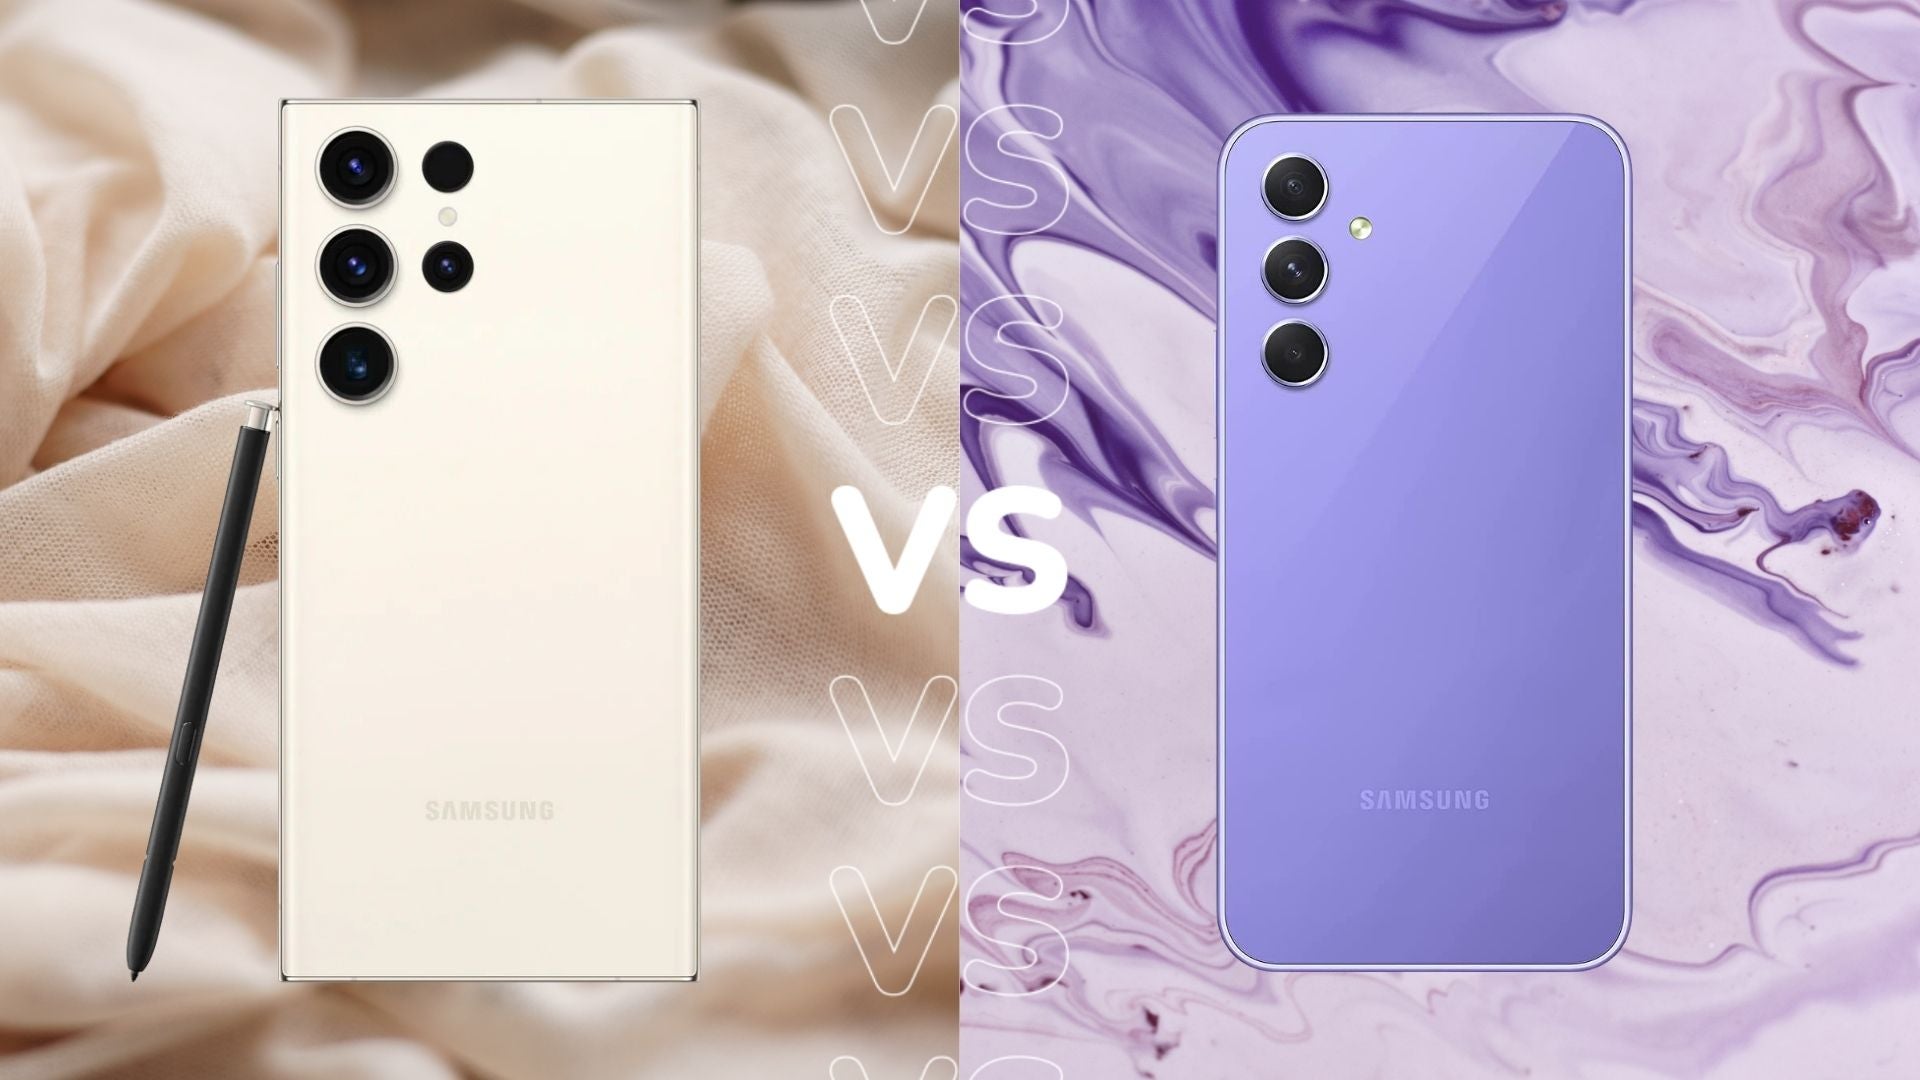 Samsung Galaxy S vs Galaxy A: What's the difference?